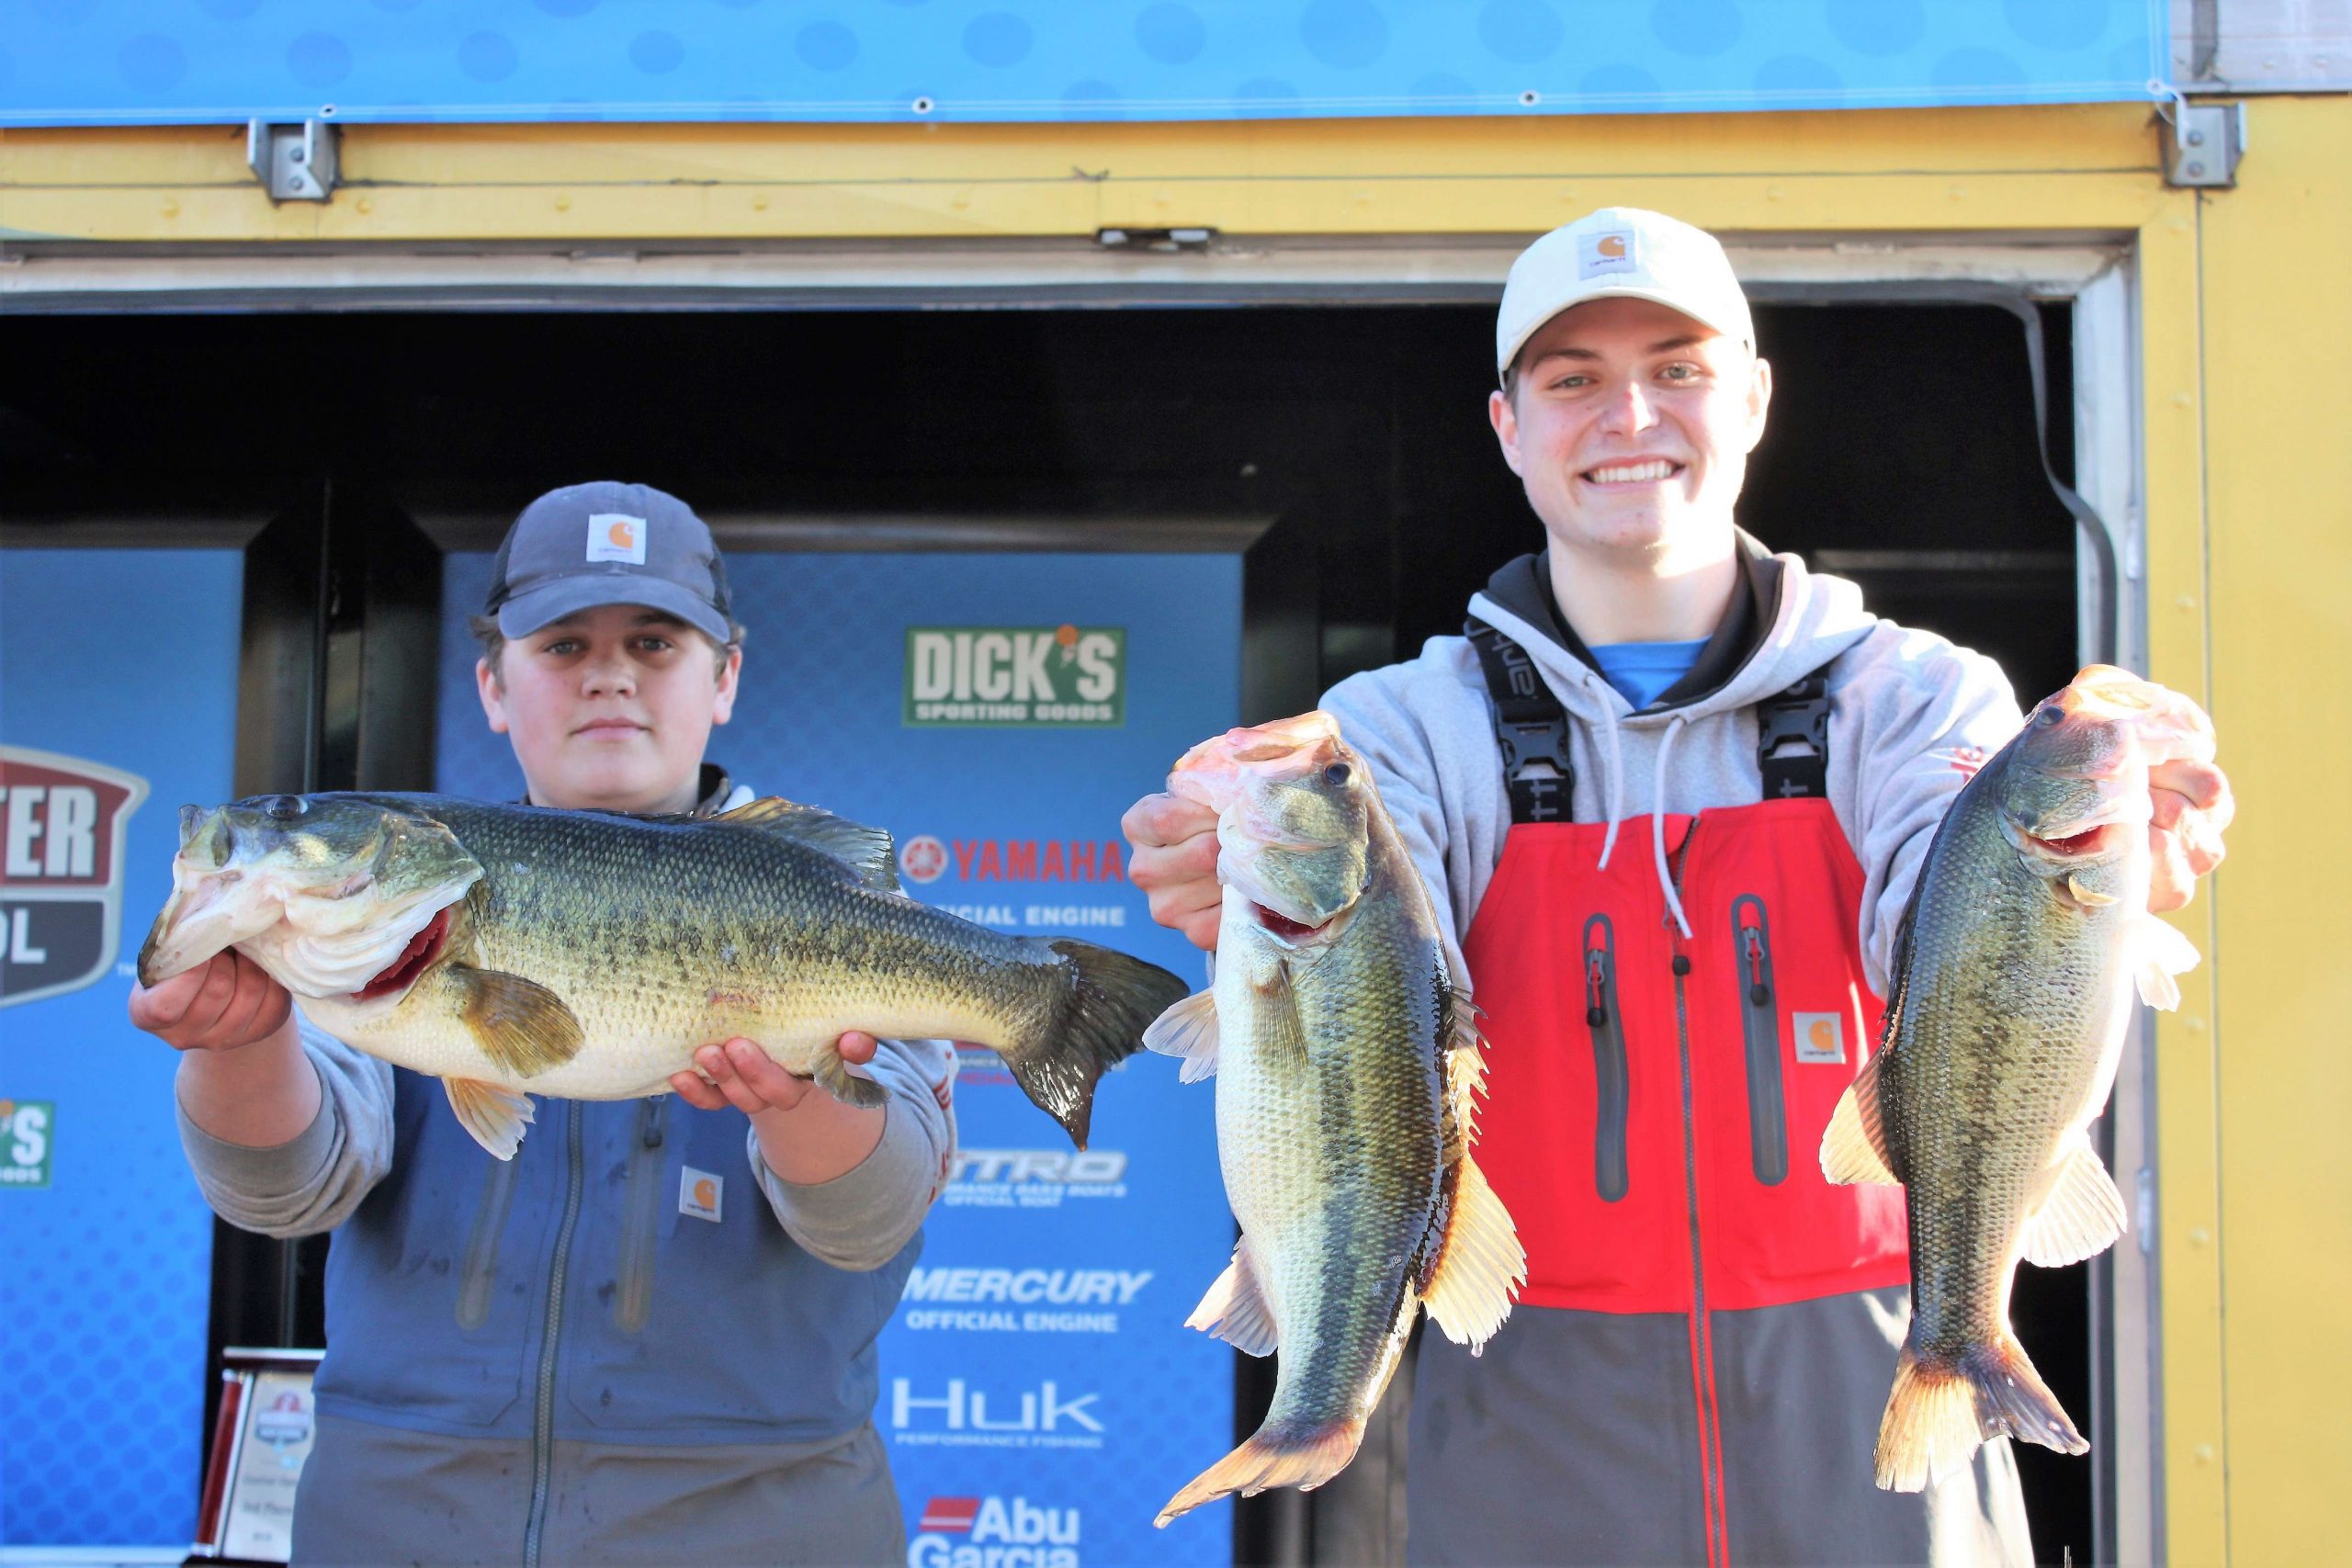 Christopher Capdeboscq and Forrest Lagarde of Northlake Christian School in Covington, Louisiana placed second overall with a limit that weighed 19-4. Lagarde is holding the 8-4 big bass that was a Toyota Texas ShareLunker. 